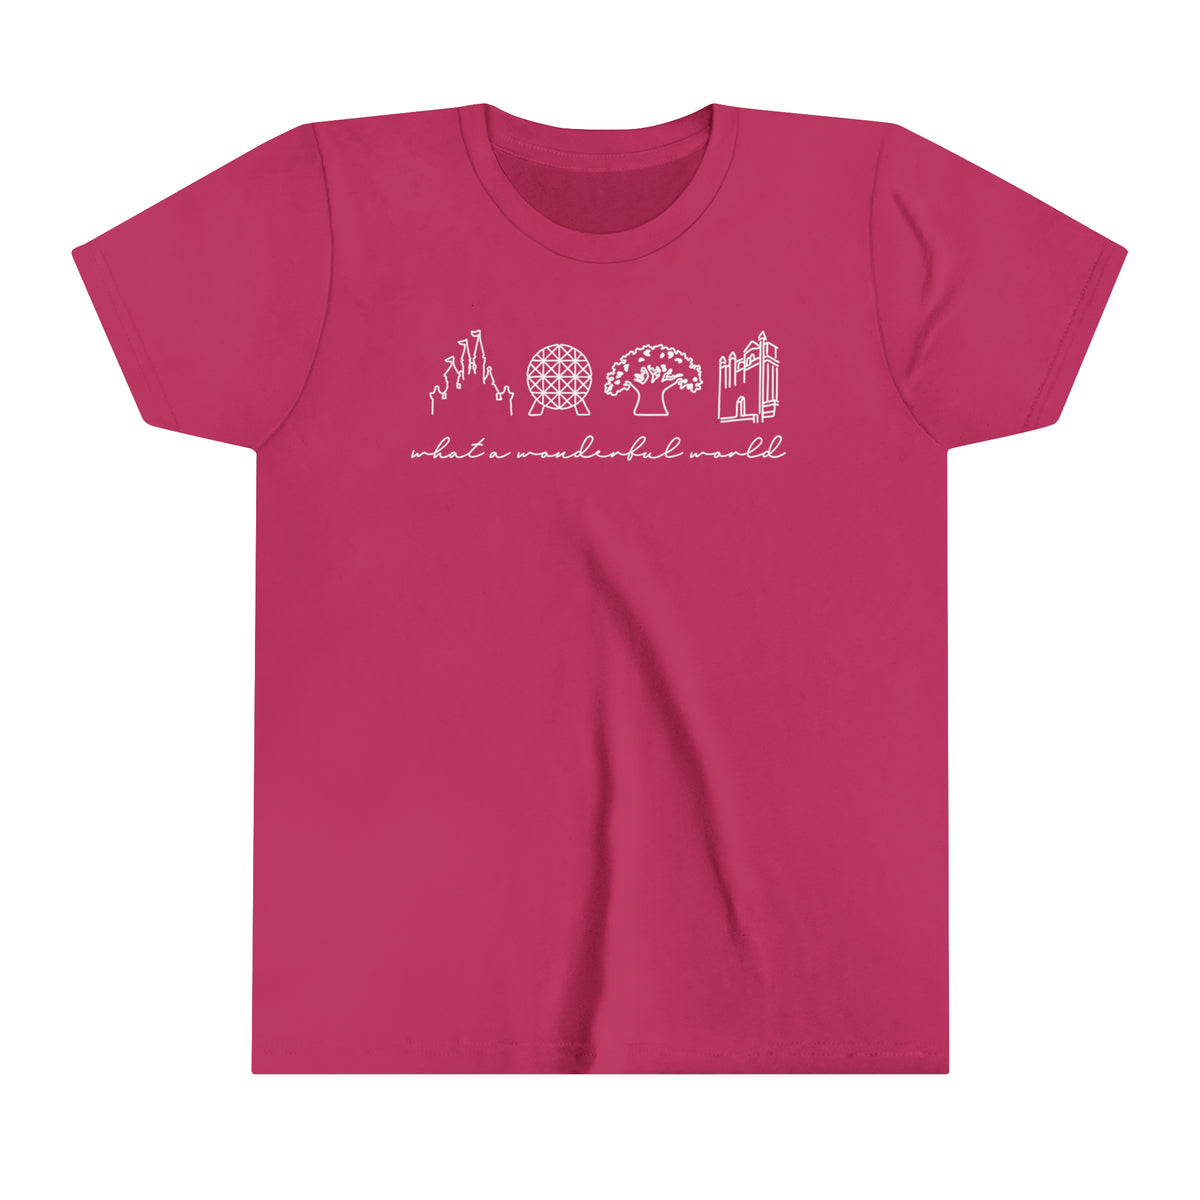 What A Wonderful World Bella Canvas Youth Short Sleeve Tee